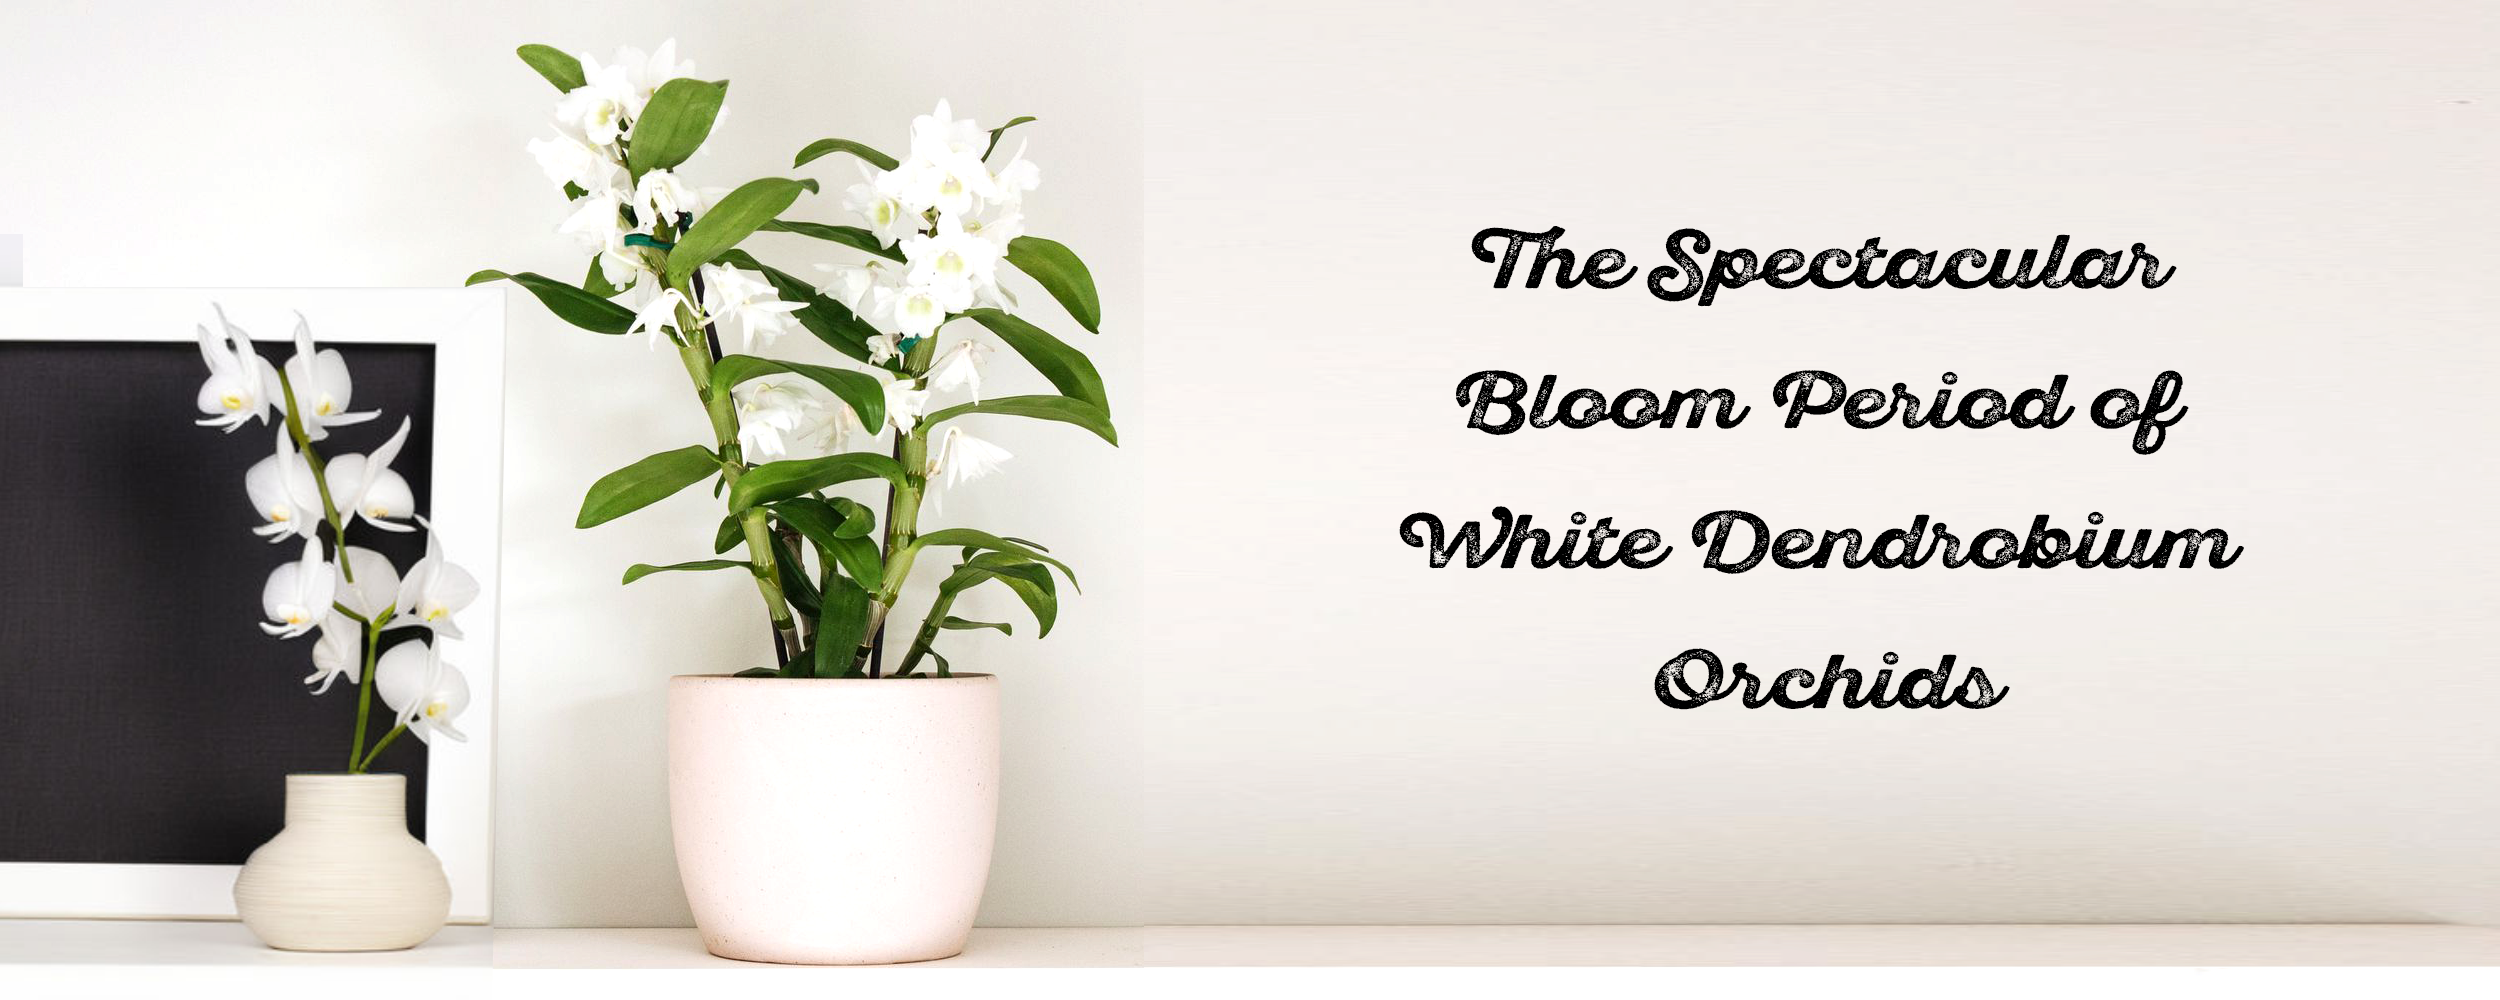 The Spectacular Bloom Period of White Dendrobium Orchids